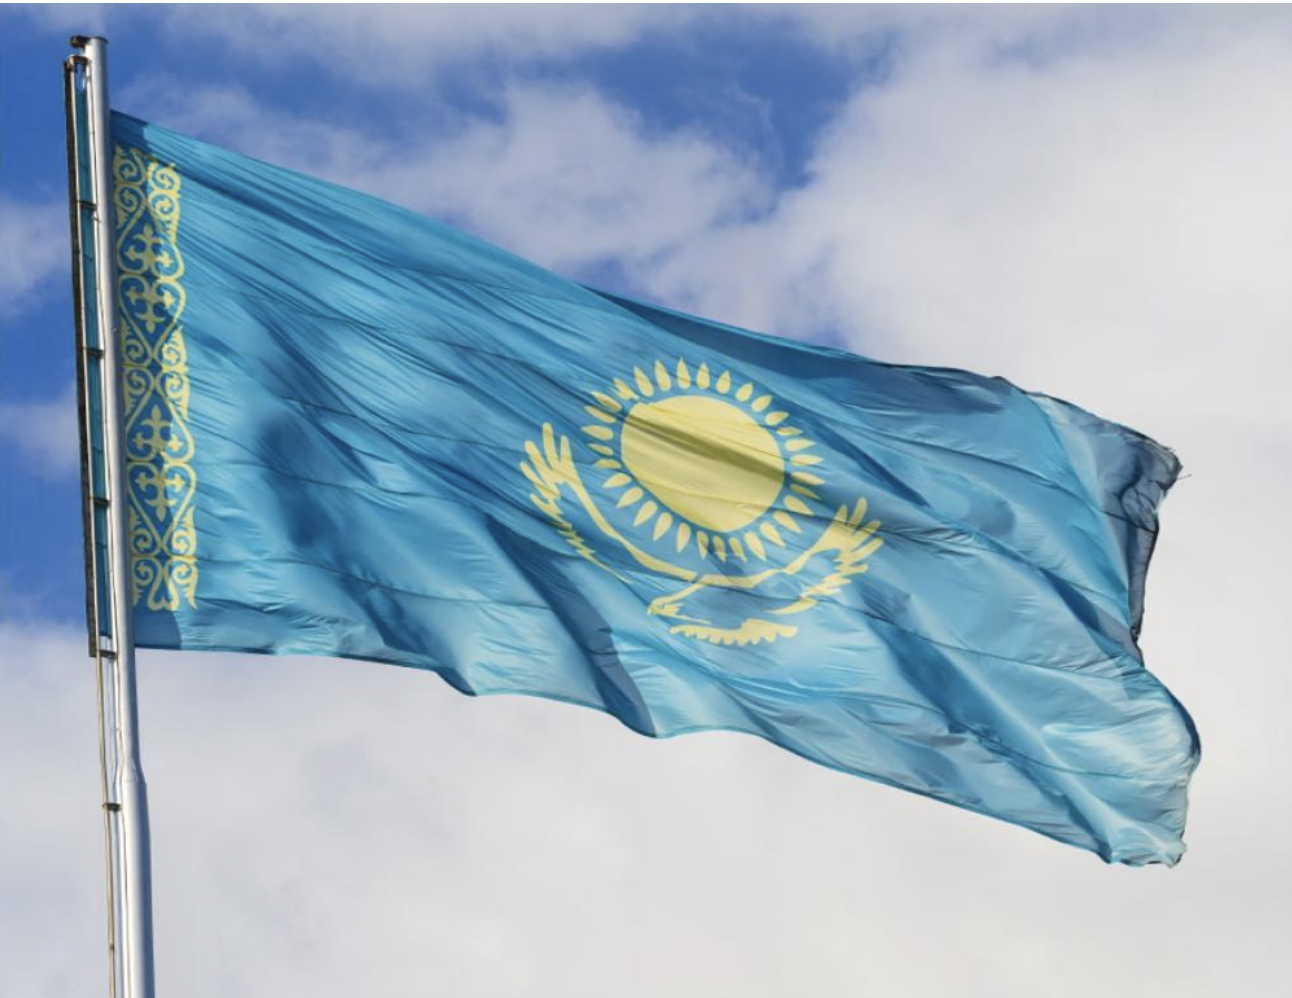 The Astana Financial Services Authority (AFSA) has granted Binance preliminary authorization to operate a digital asset trading facility and offer custody at the Astana International Financial Center (AIFC).